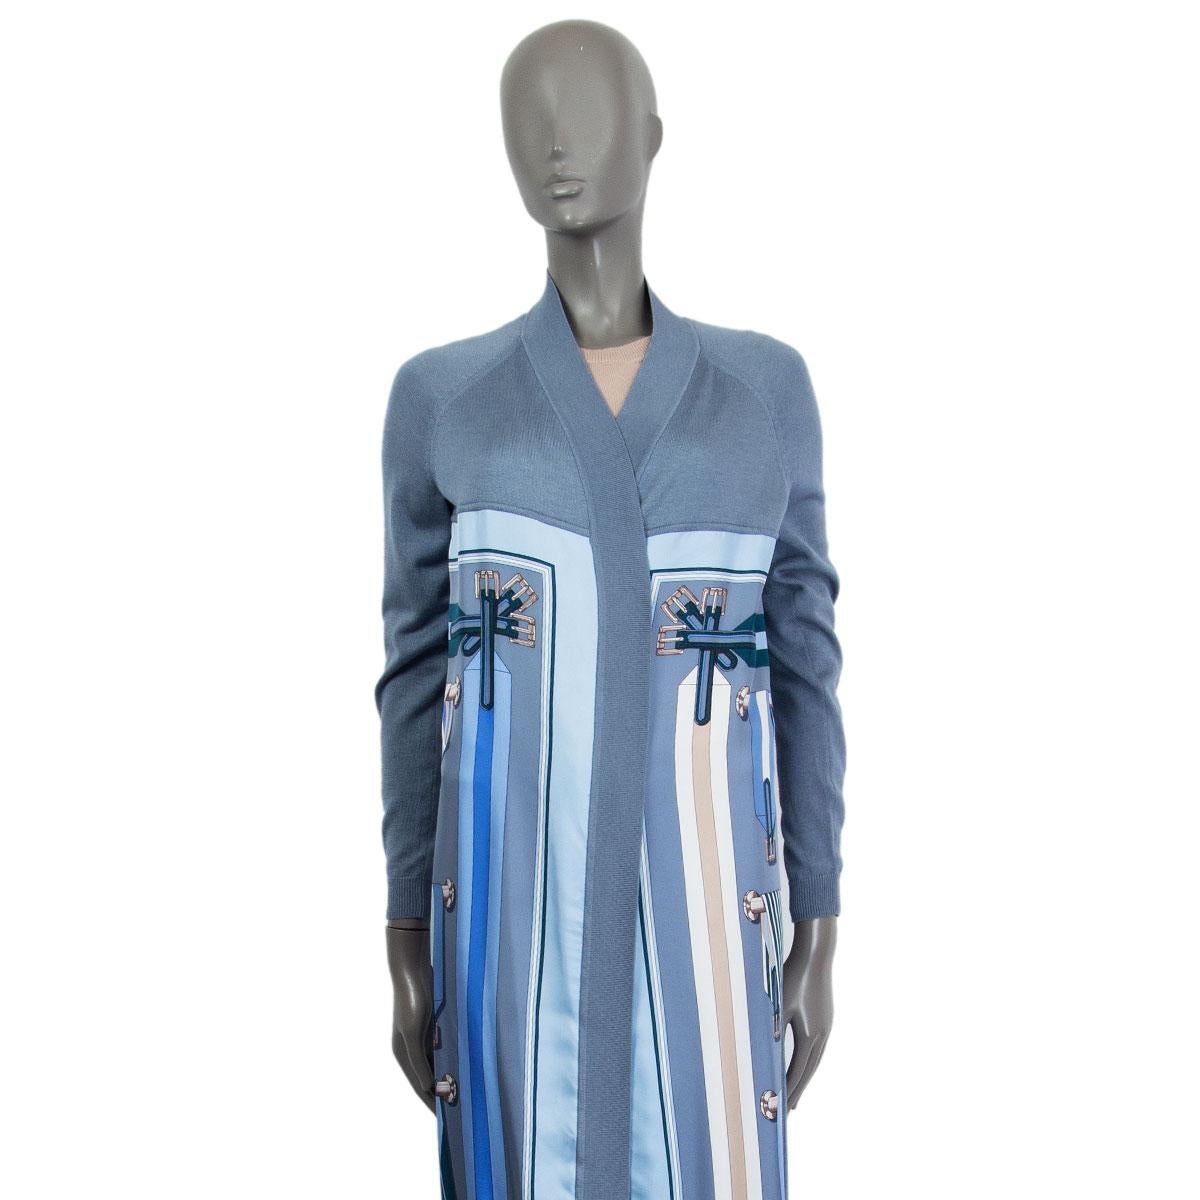 Hermès 'Les Sangles' open coat with ragaln sleeves in sky blue, blue, pertol, taupe, cream and off-white silk (100%) and dove blue cashmere (100%) sleeves and back part and trim. Has been worn and is in excellent condition.

Tag Size 34
Size